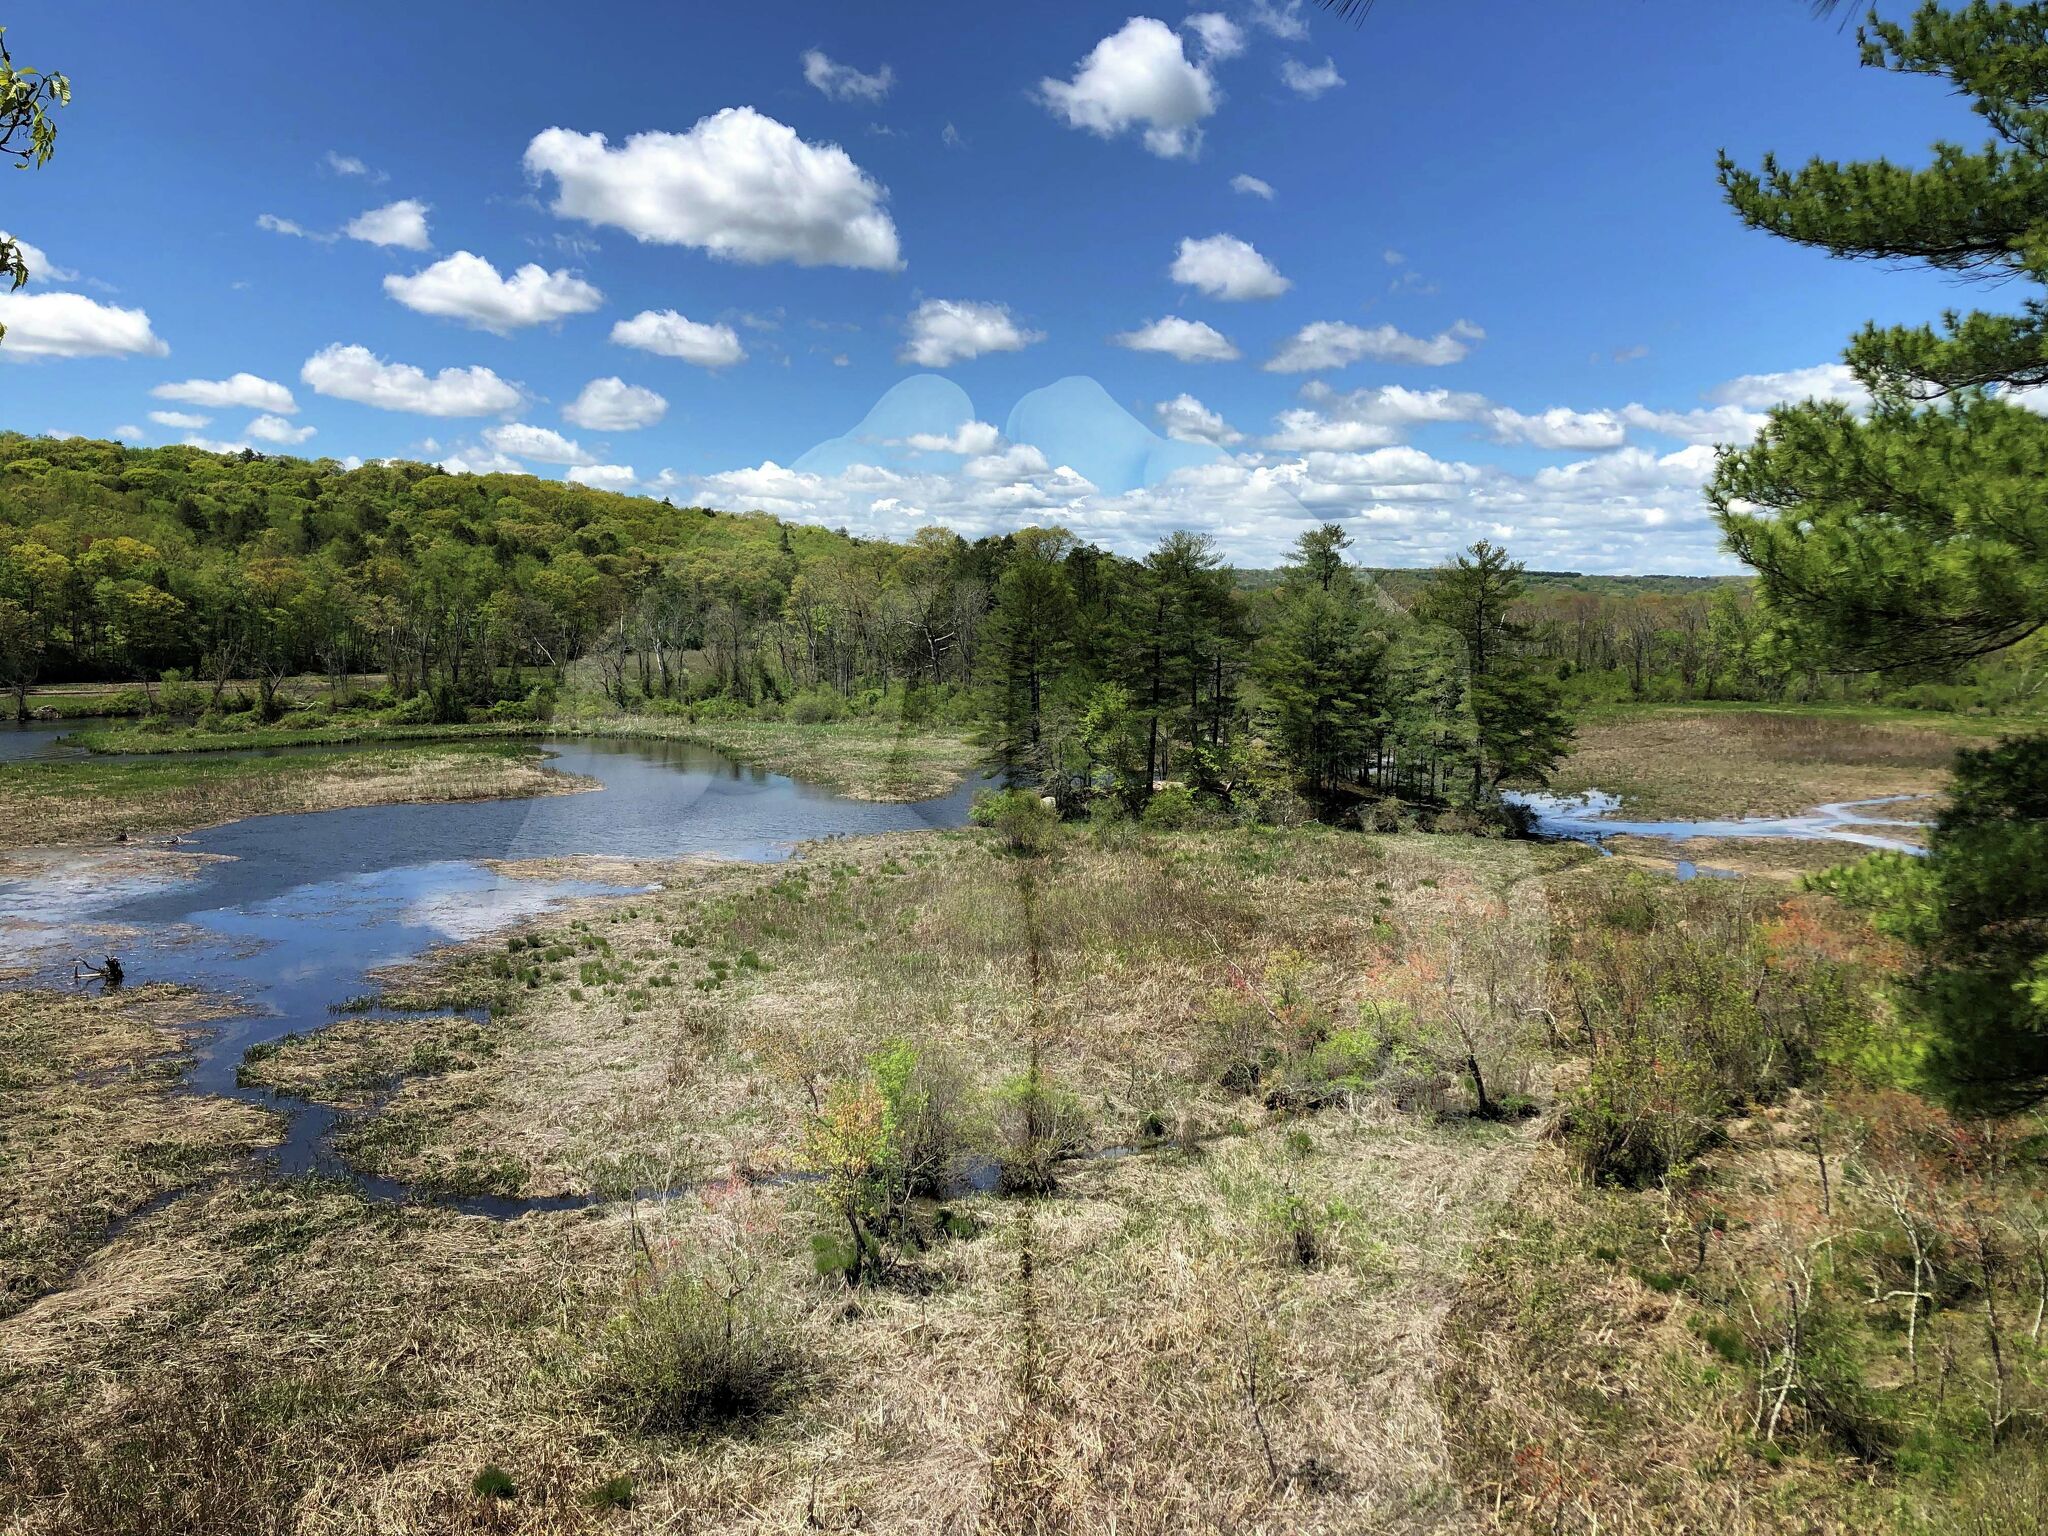 Land trusts are key to preserving CT's wilderness areas